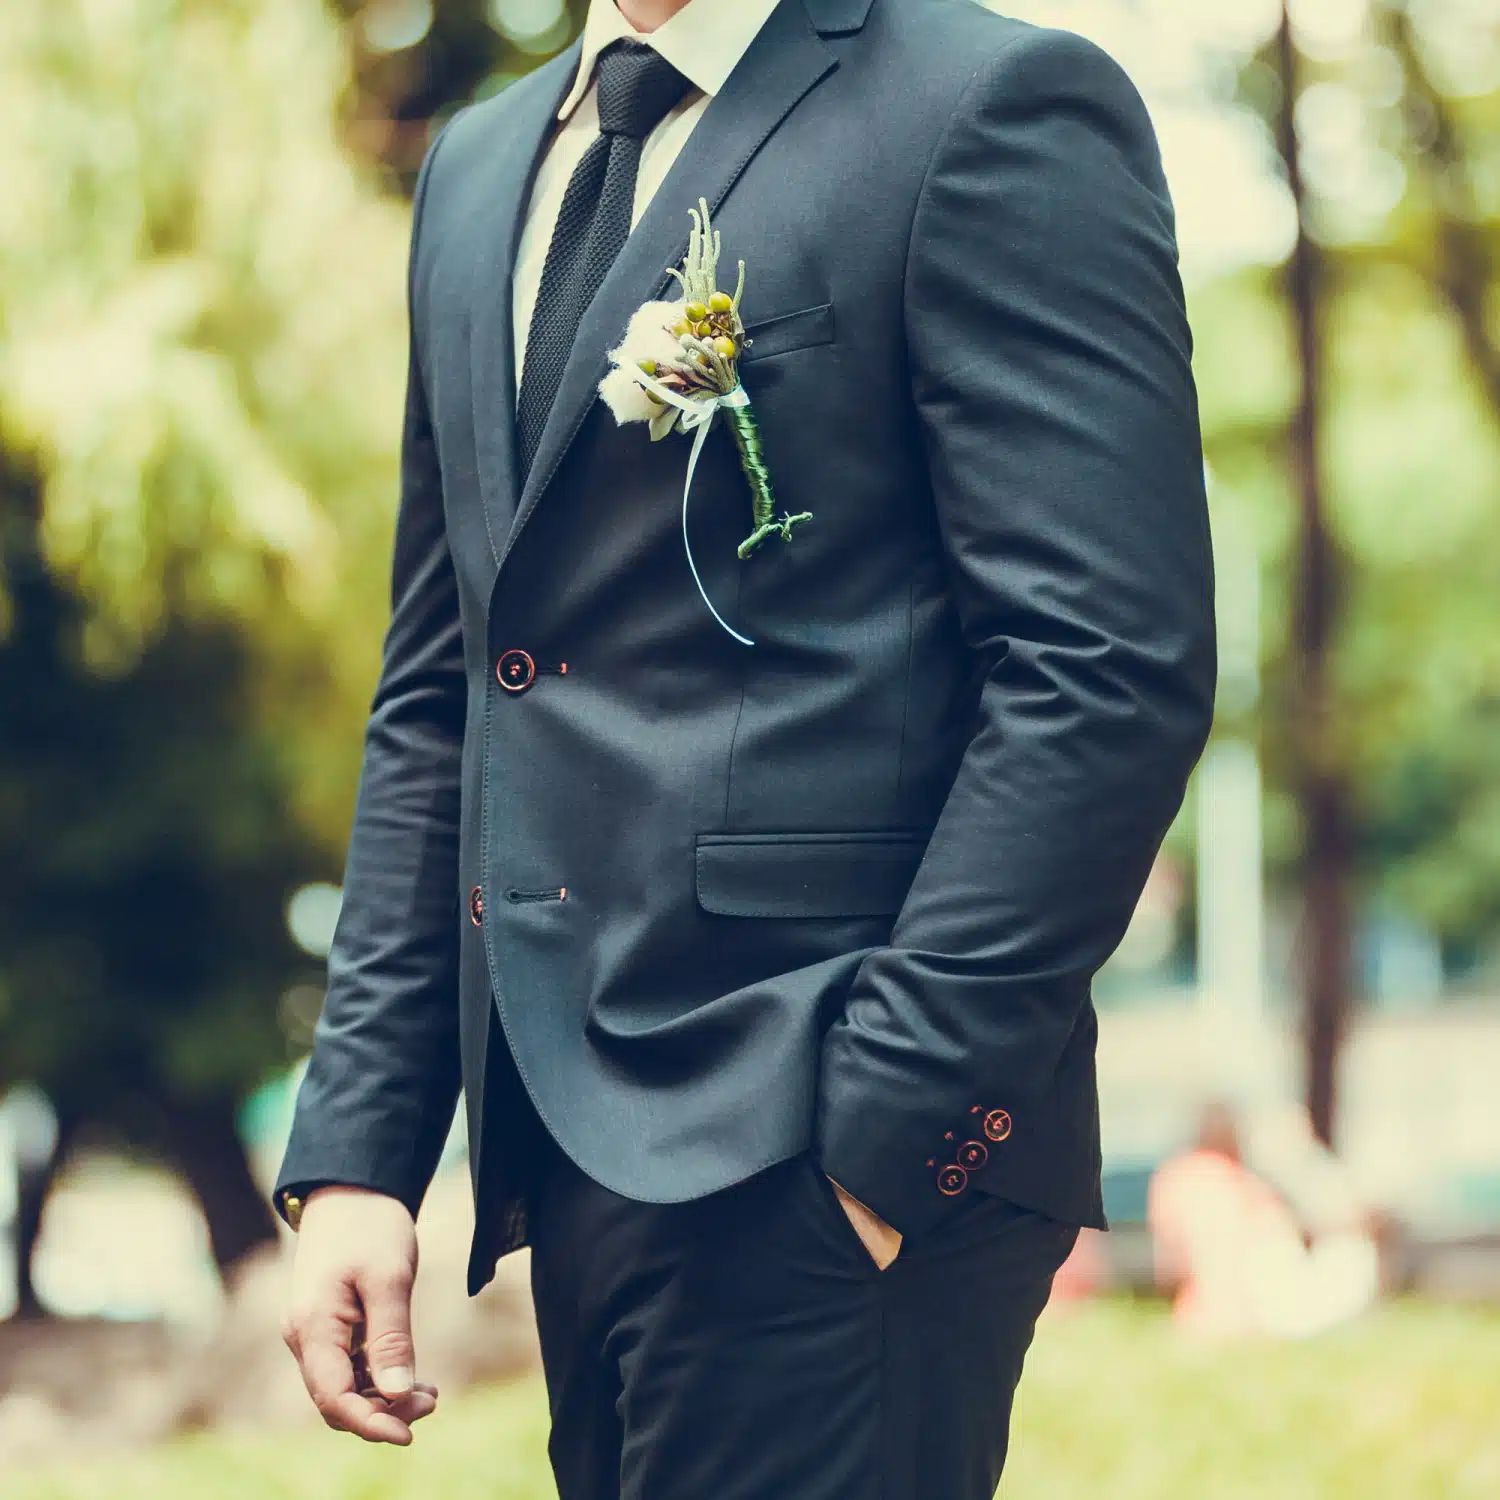 Fall Wedding Attire for Men: How To Suit The Season